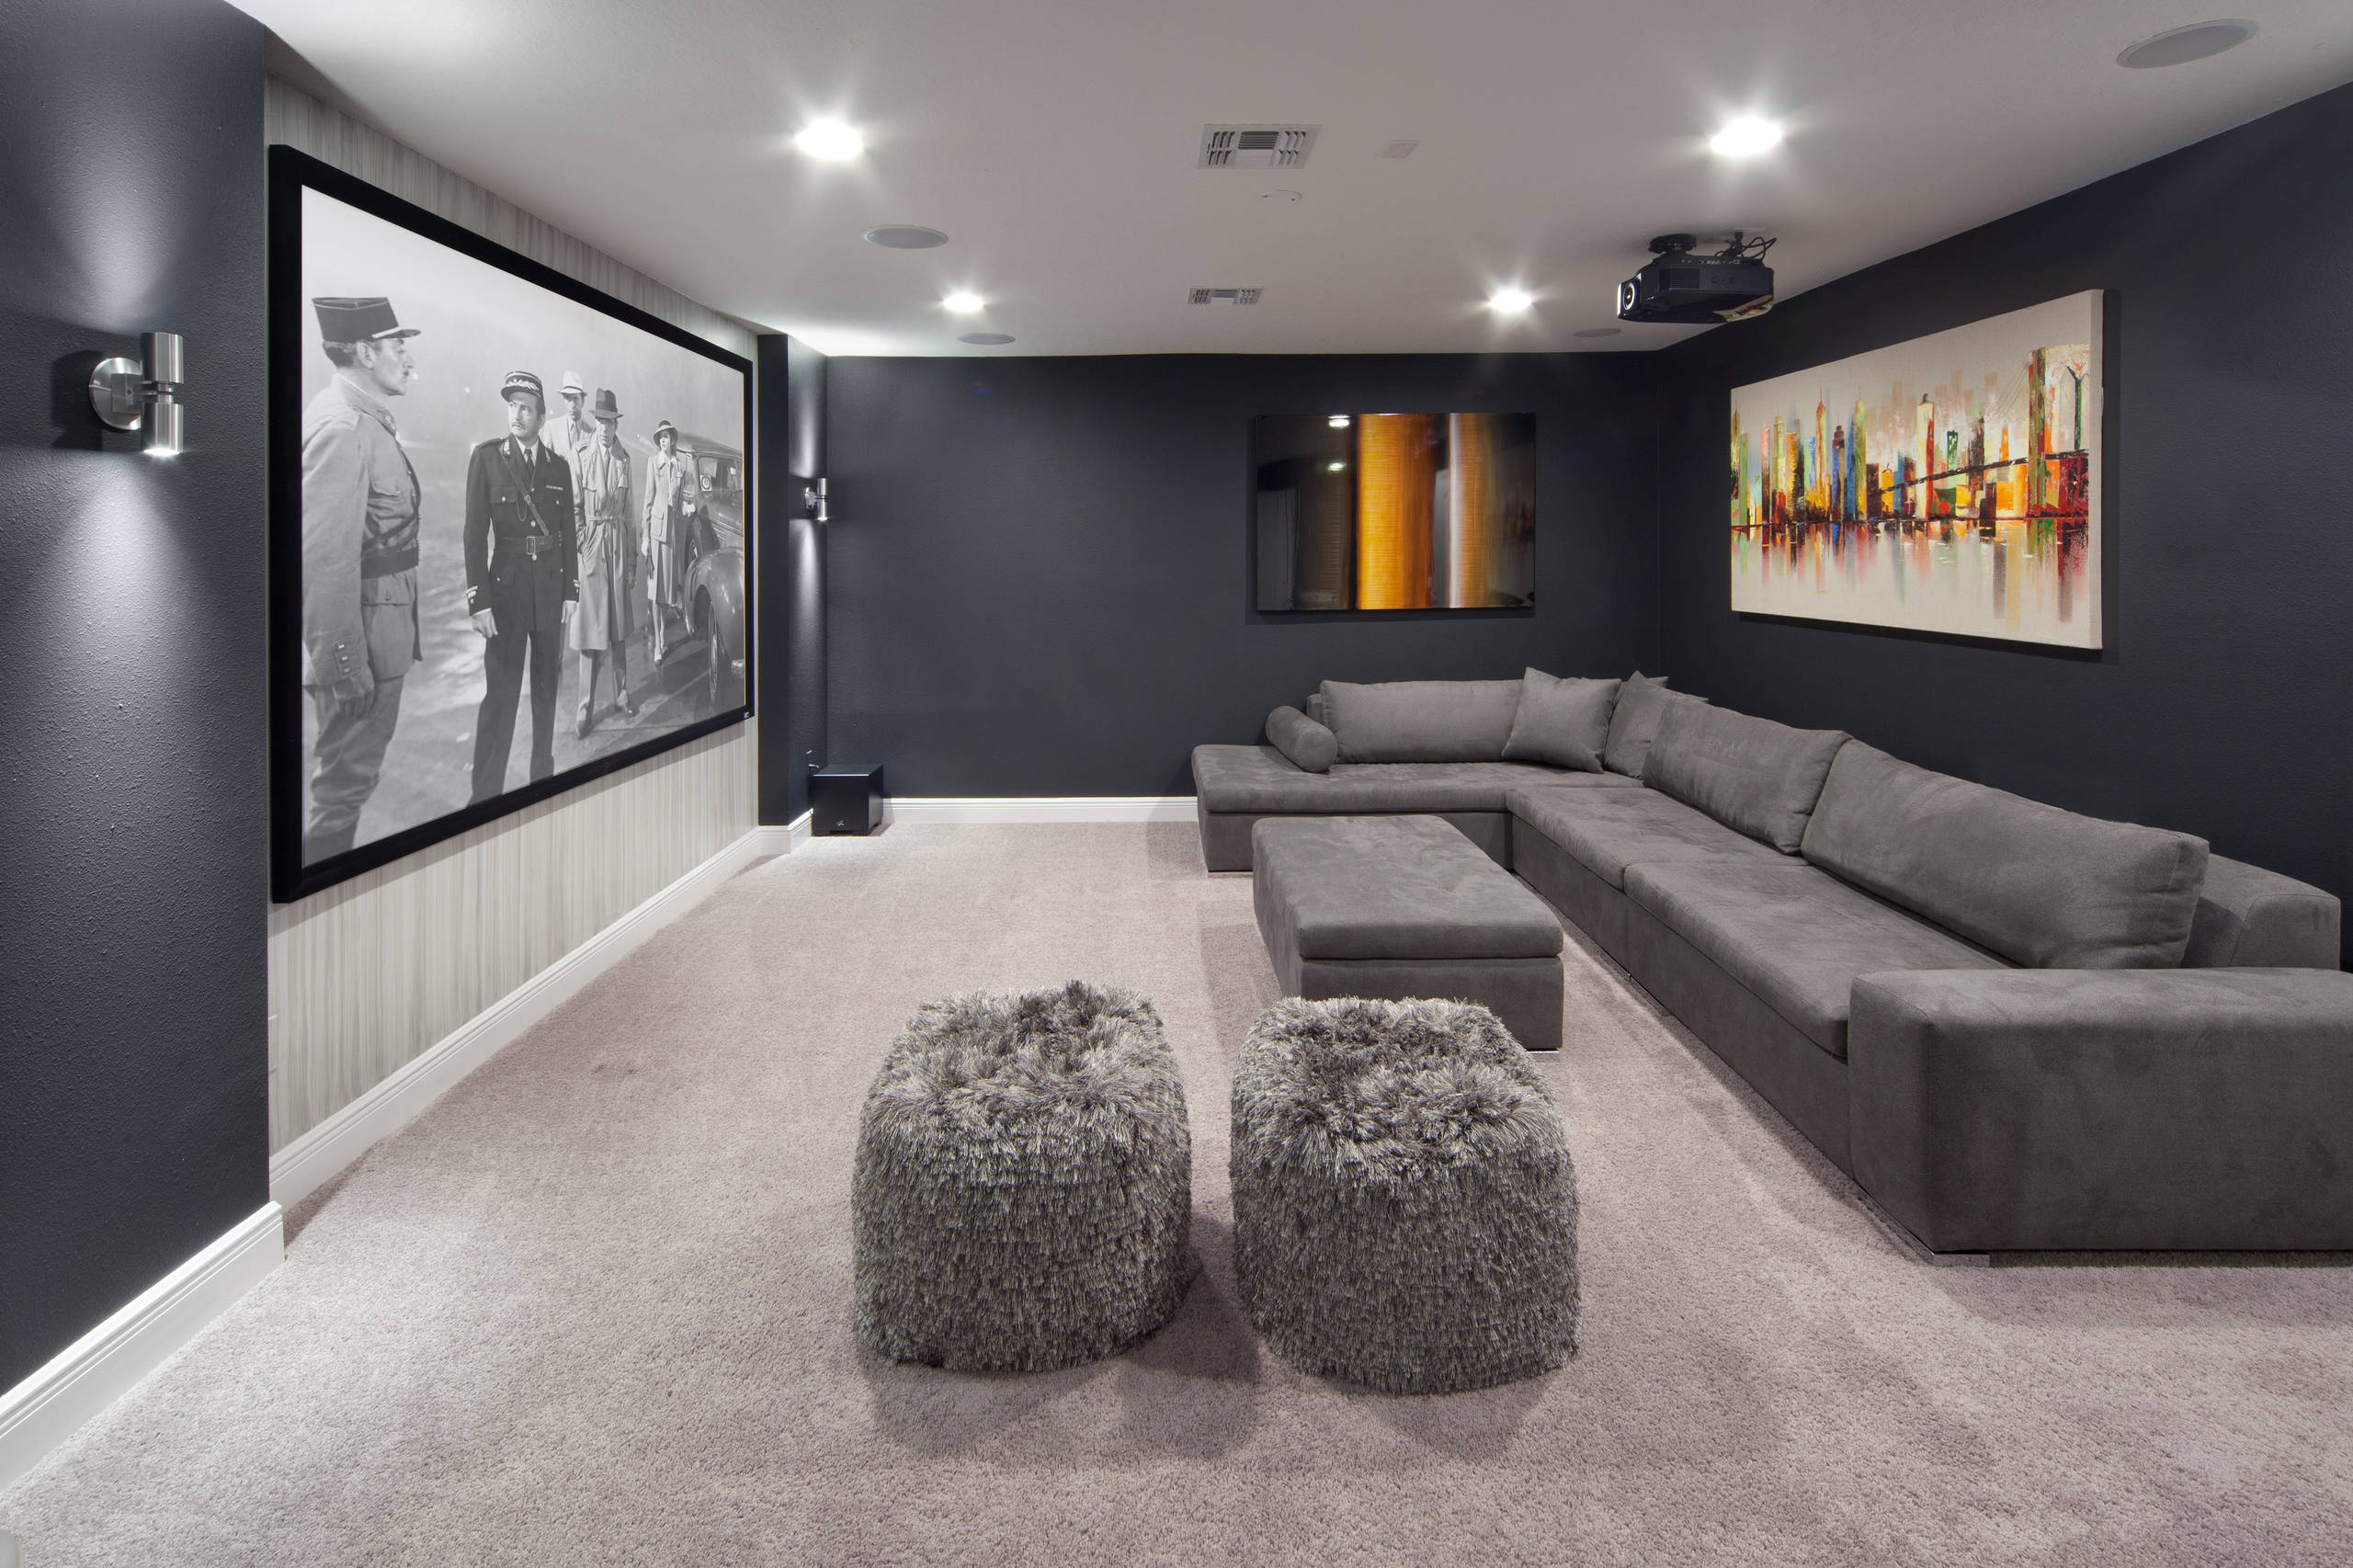 Home Theater Room Paint Color Photos